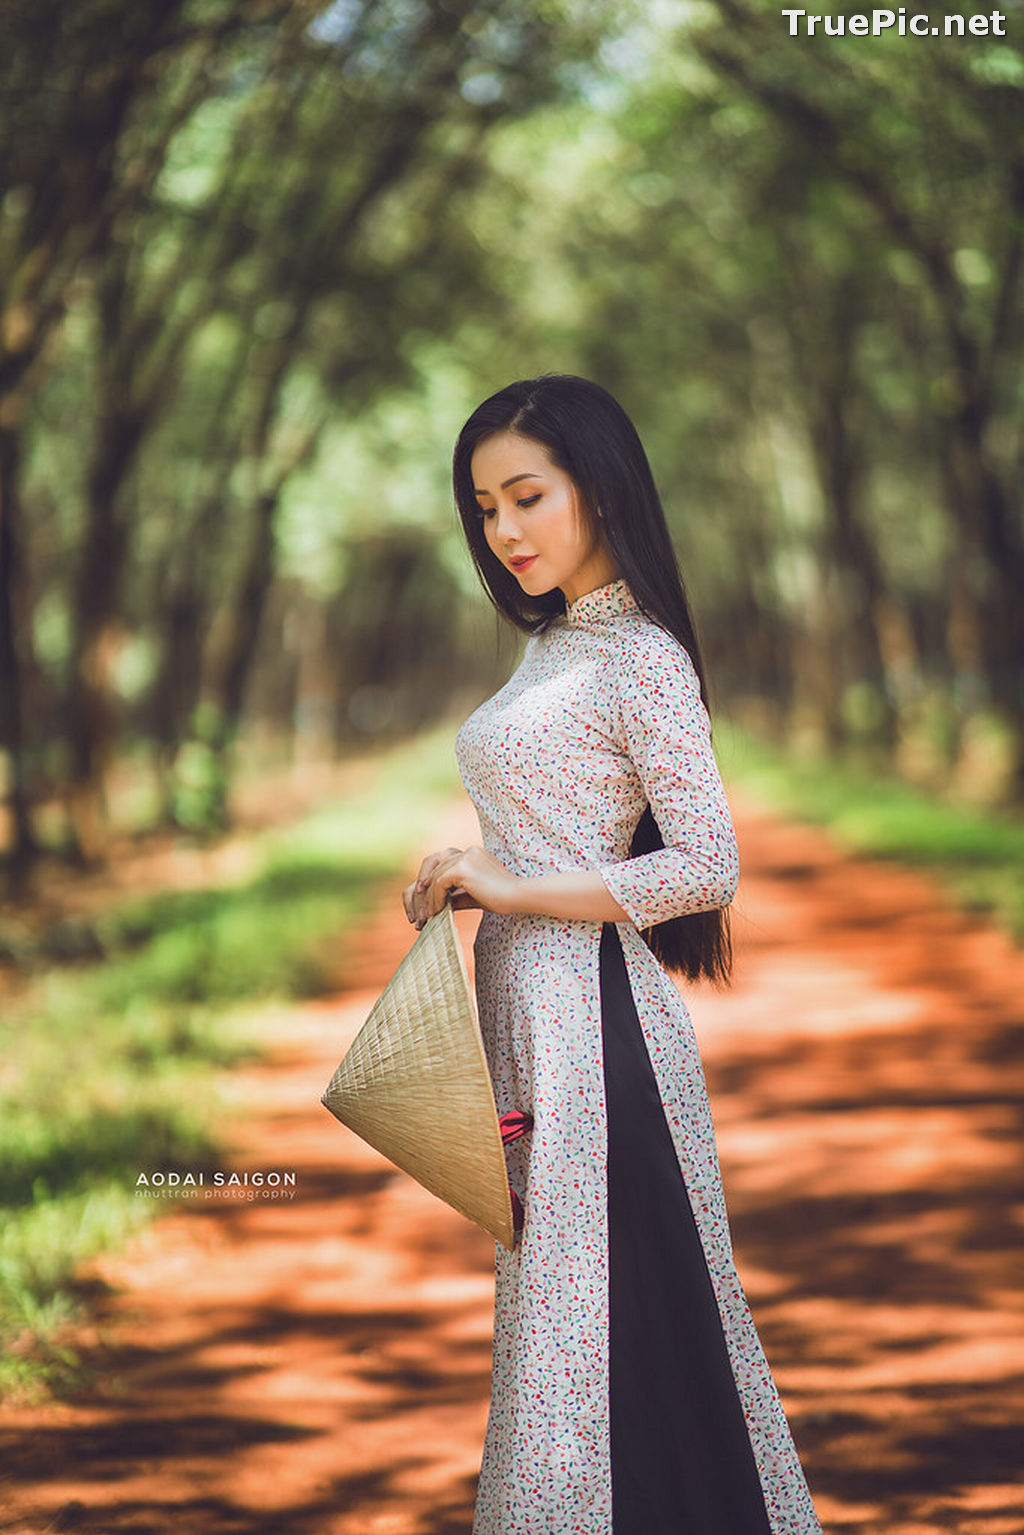 Image The Beauty of Vietnamese Girls with Traditional Dress (Ao Dai) #5 - TruePic.net - Picture-61